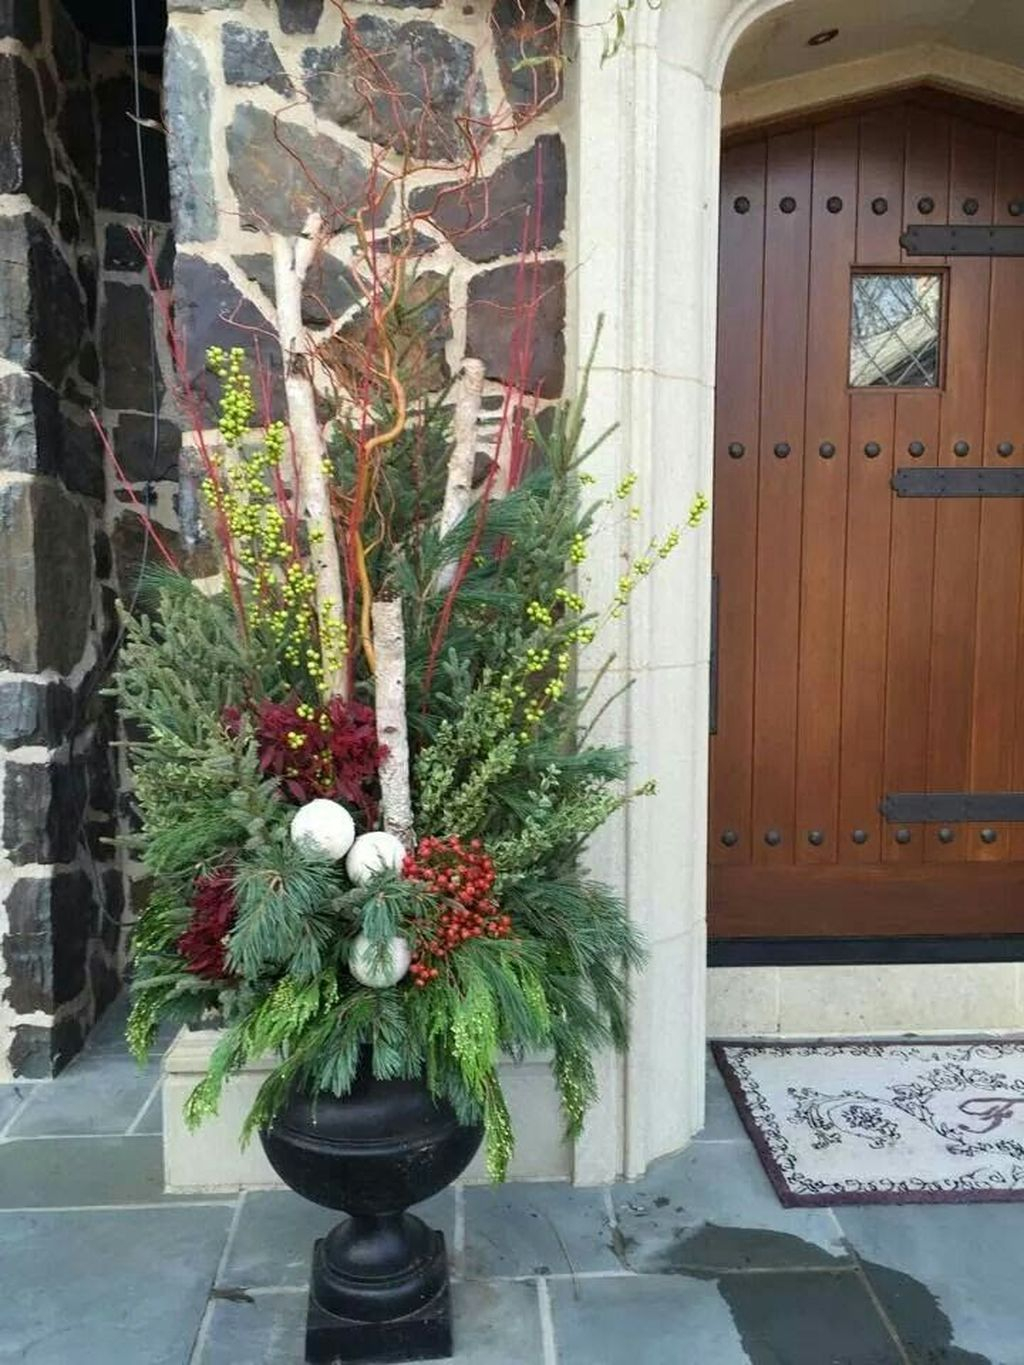 Marvelous Outdoor Holiday Planter Ideas To Beauty Porch Décor 22